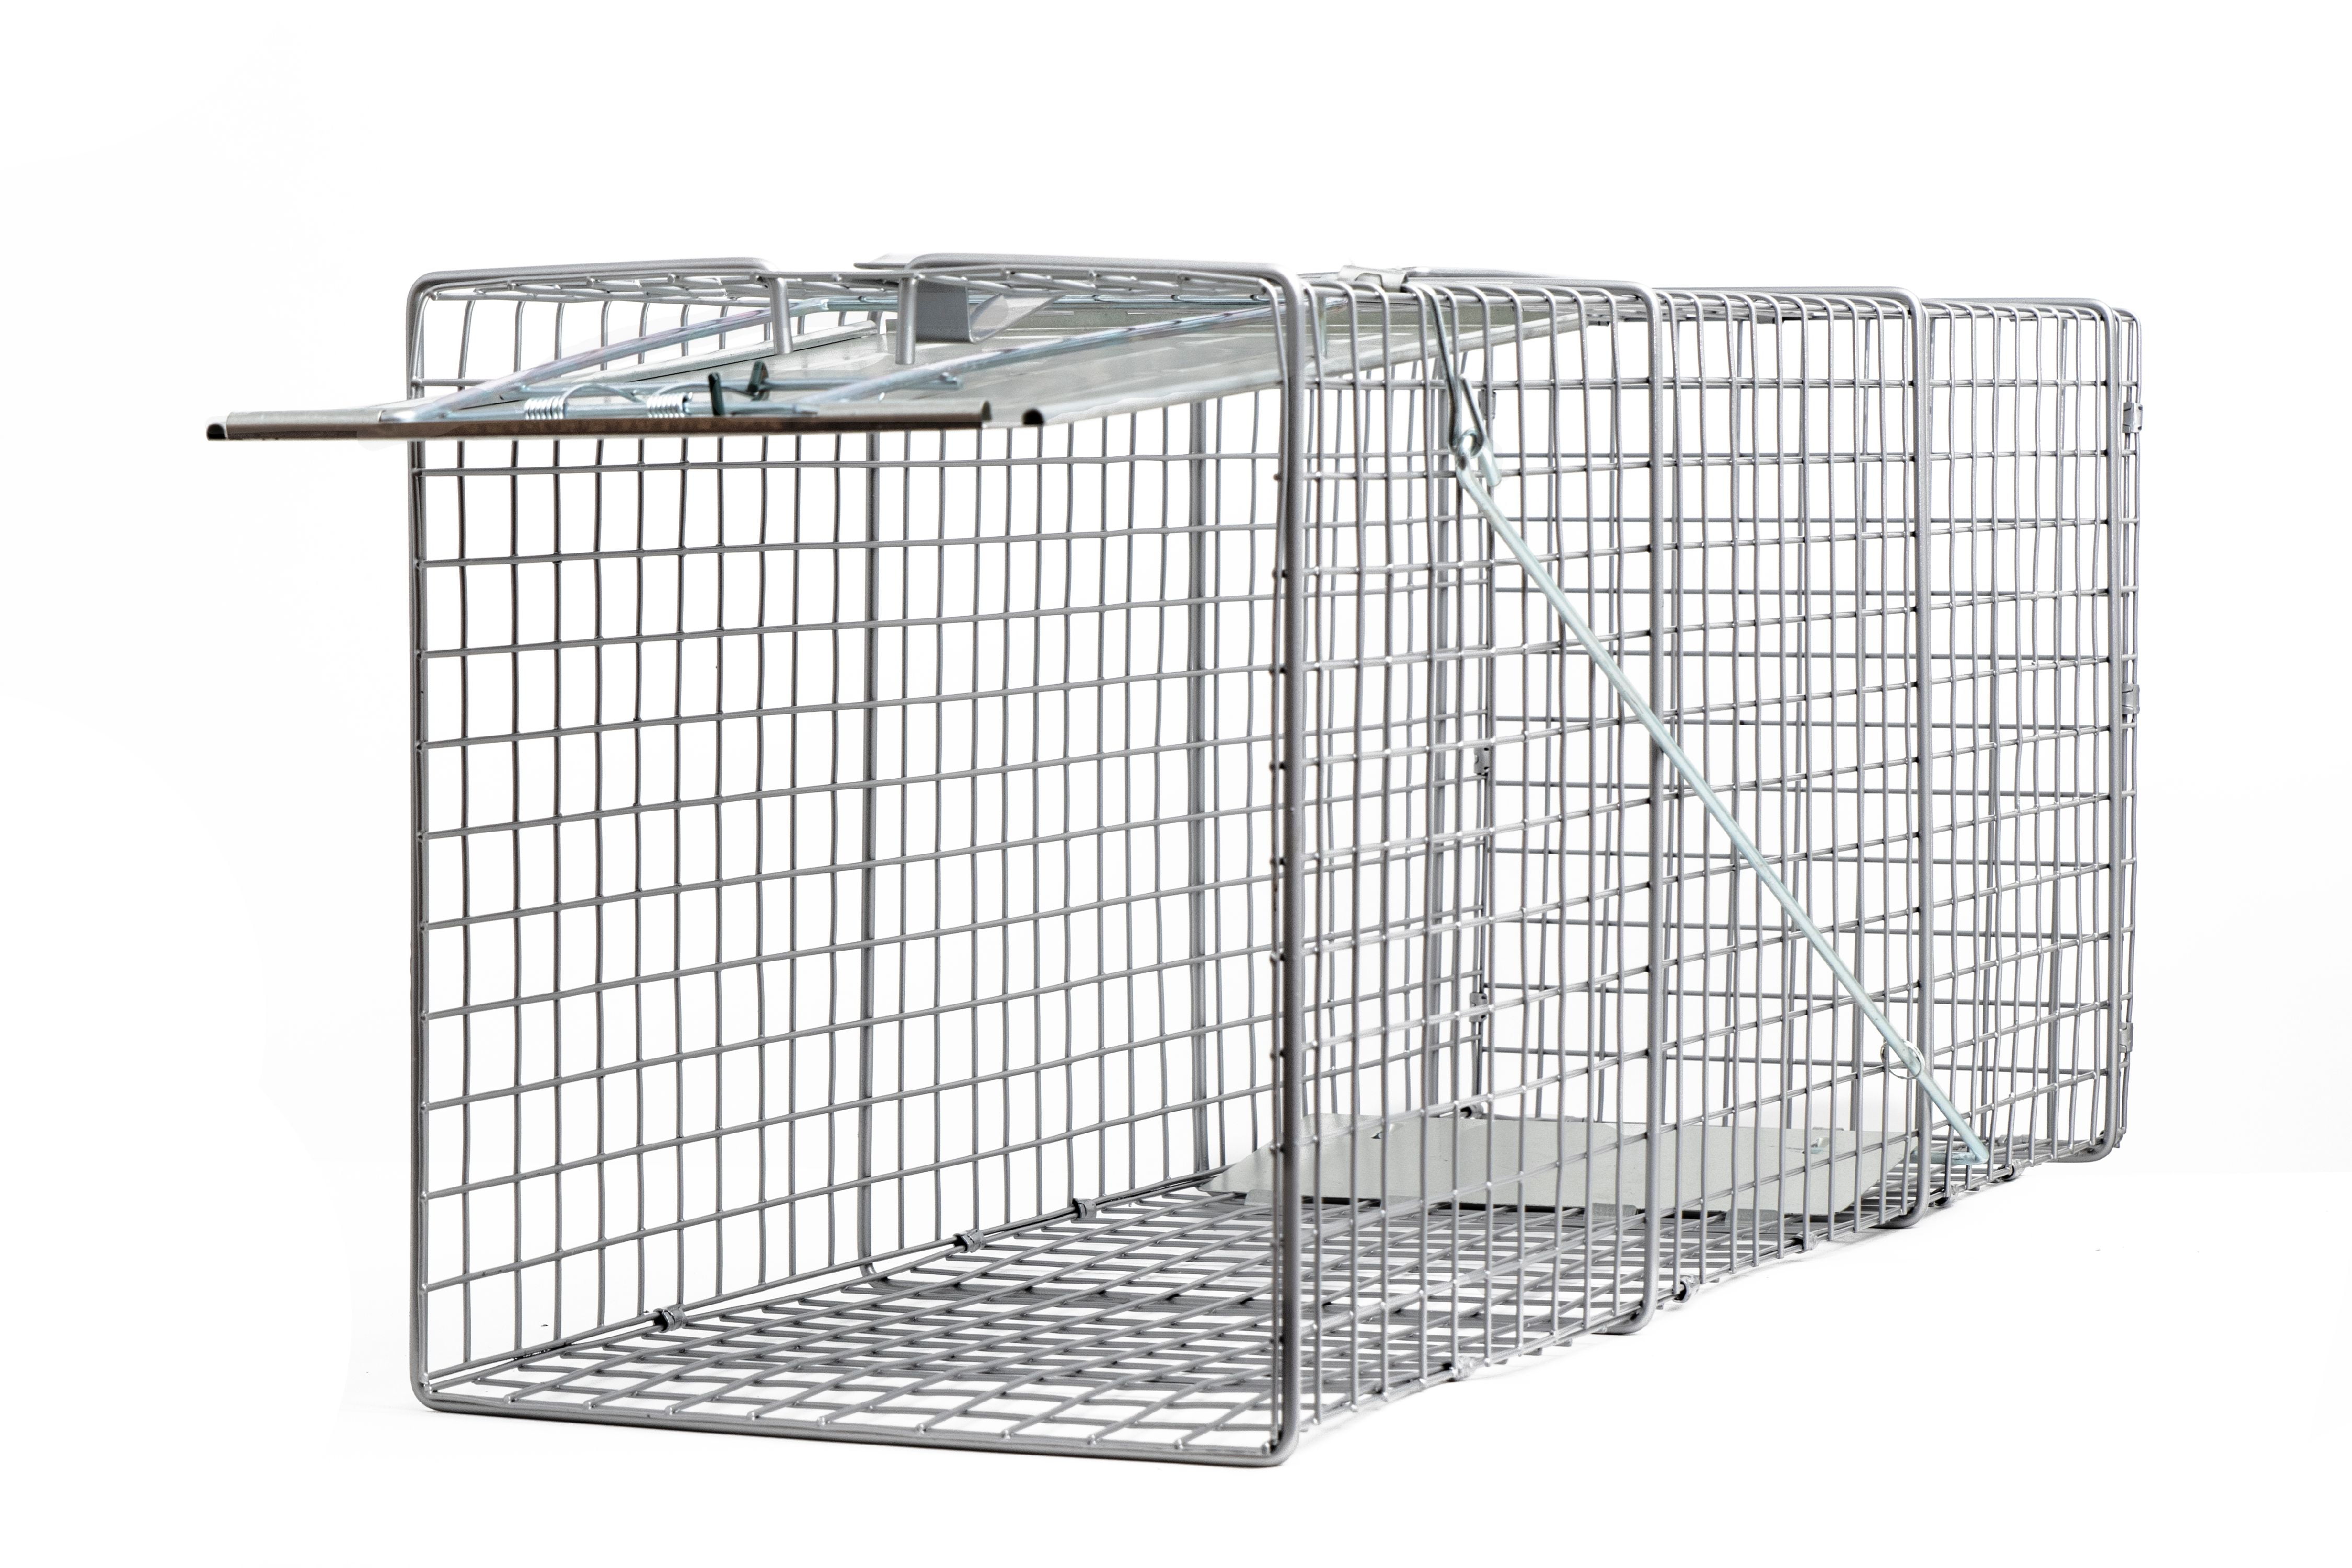 How To Make A Live Trap Large One Door Catch Release Heavy Duty Cage Live Animal Trap for Gophers,  Oppossums, Groundhogs, Beavers, and Other Similar Sized Animals,  32"x10"x12" - Walmart.com